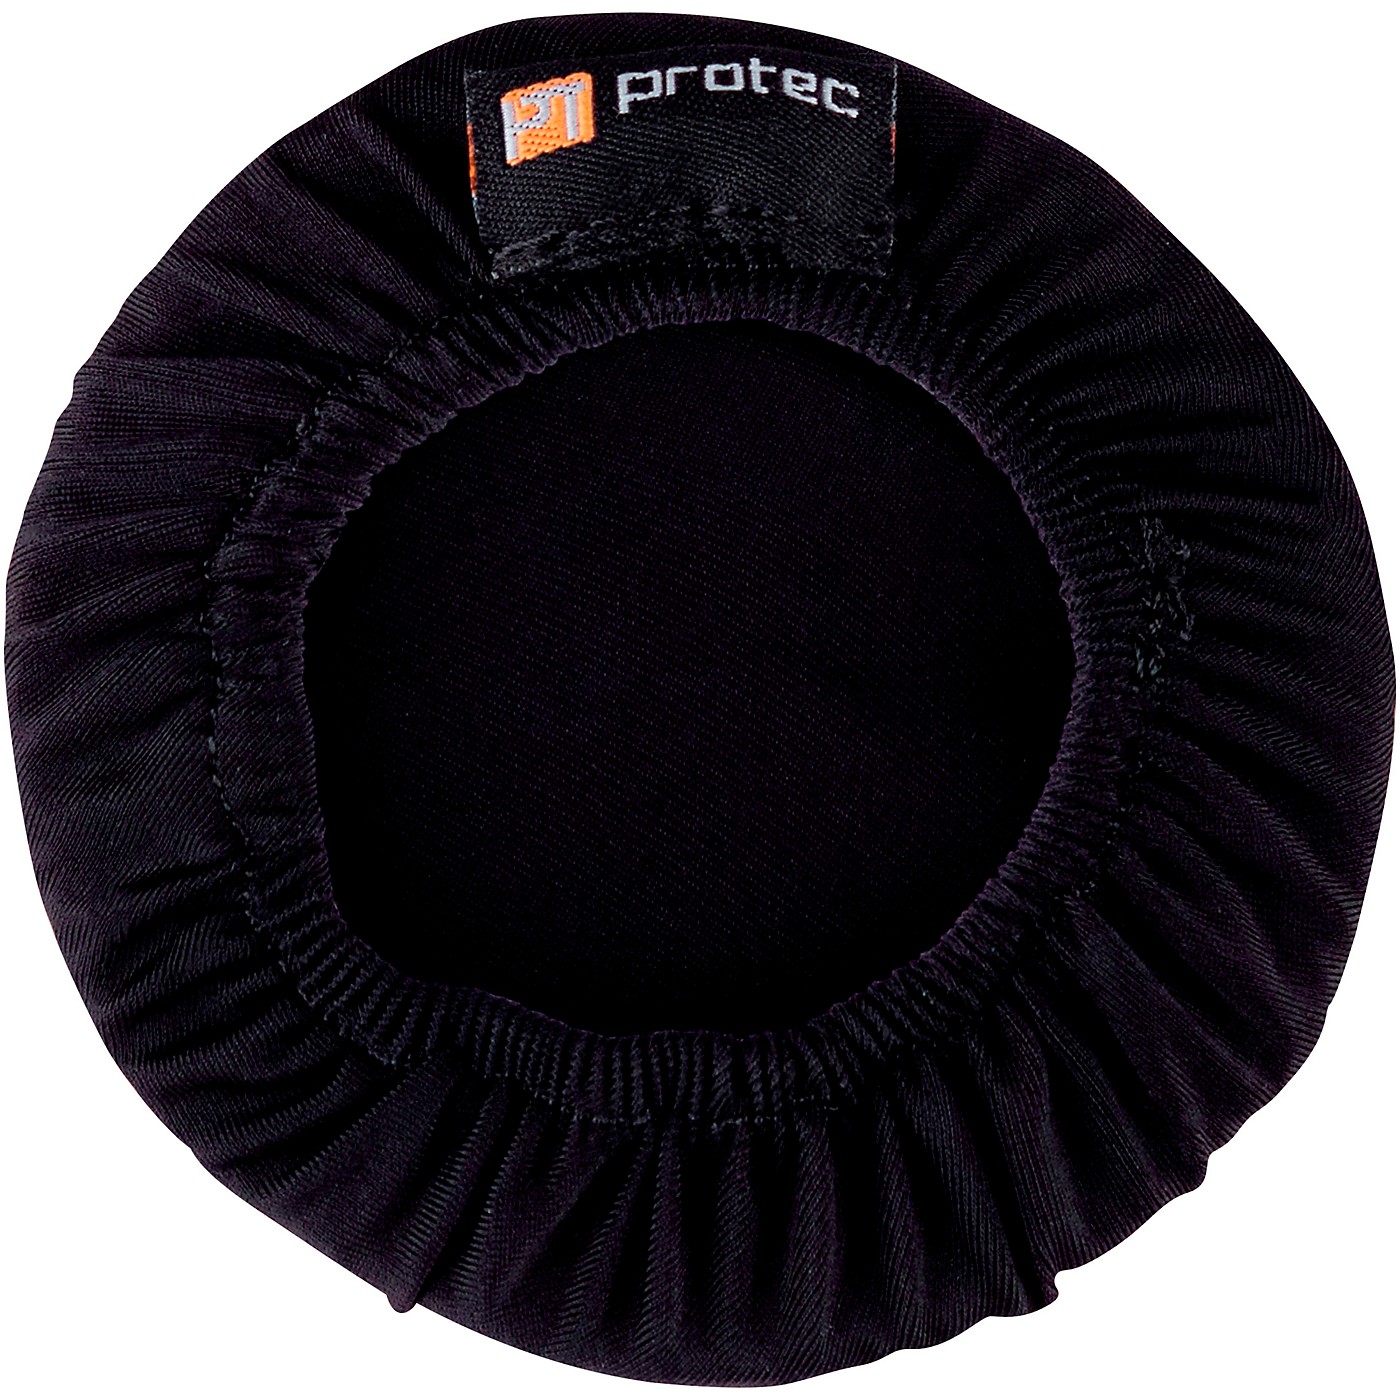 Protec Instrument Bell Cover Size 3.75